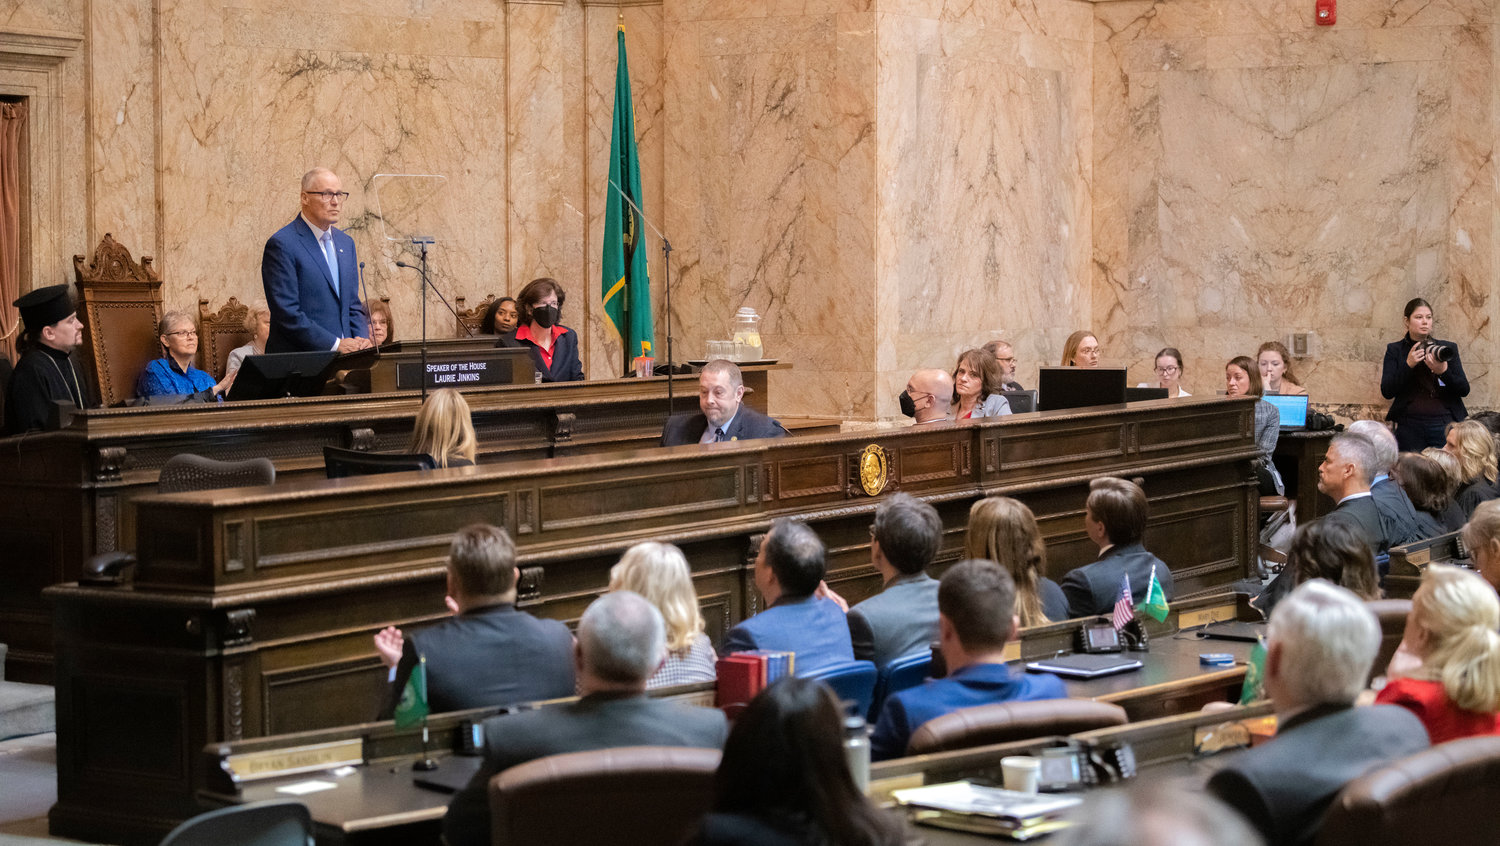 Gov. Jay Inslee delivers his 2023 State of the State speech at a joint session of the House and Senate during the first in-person session since 2020 Tuesday afternoon in Olympia.